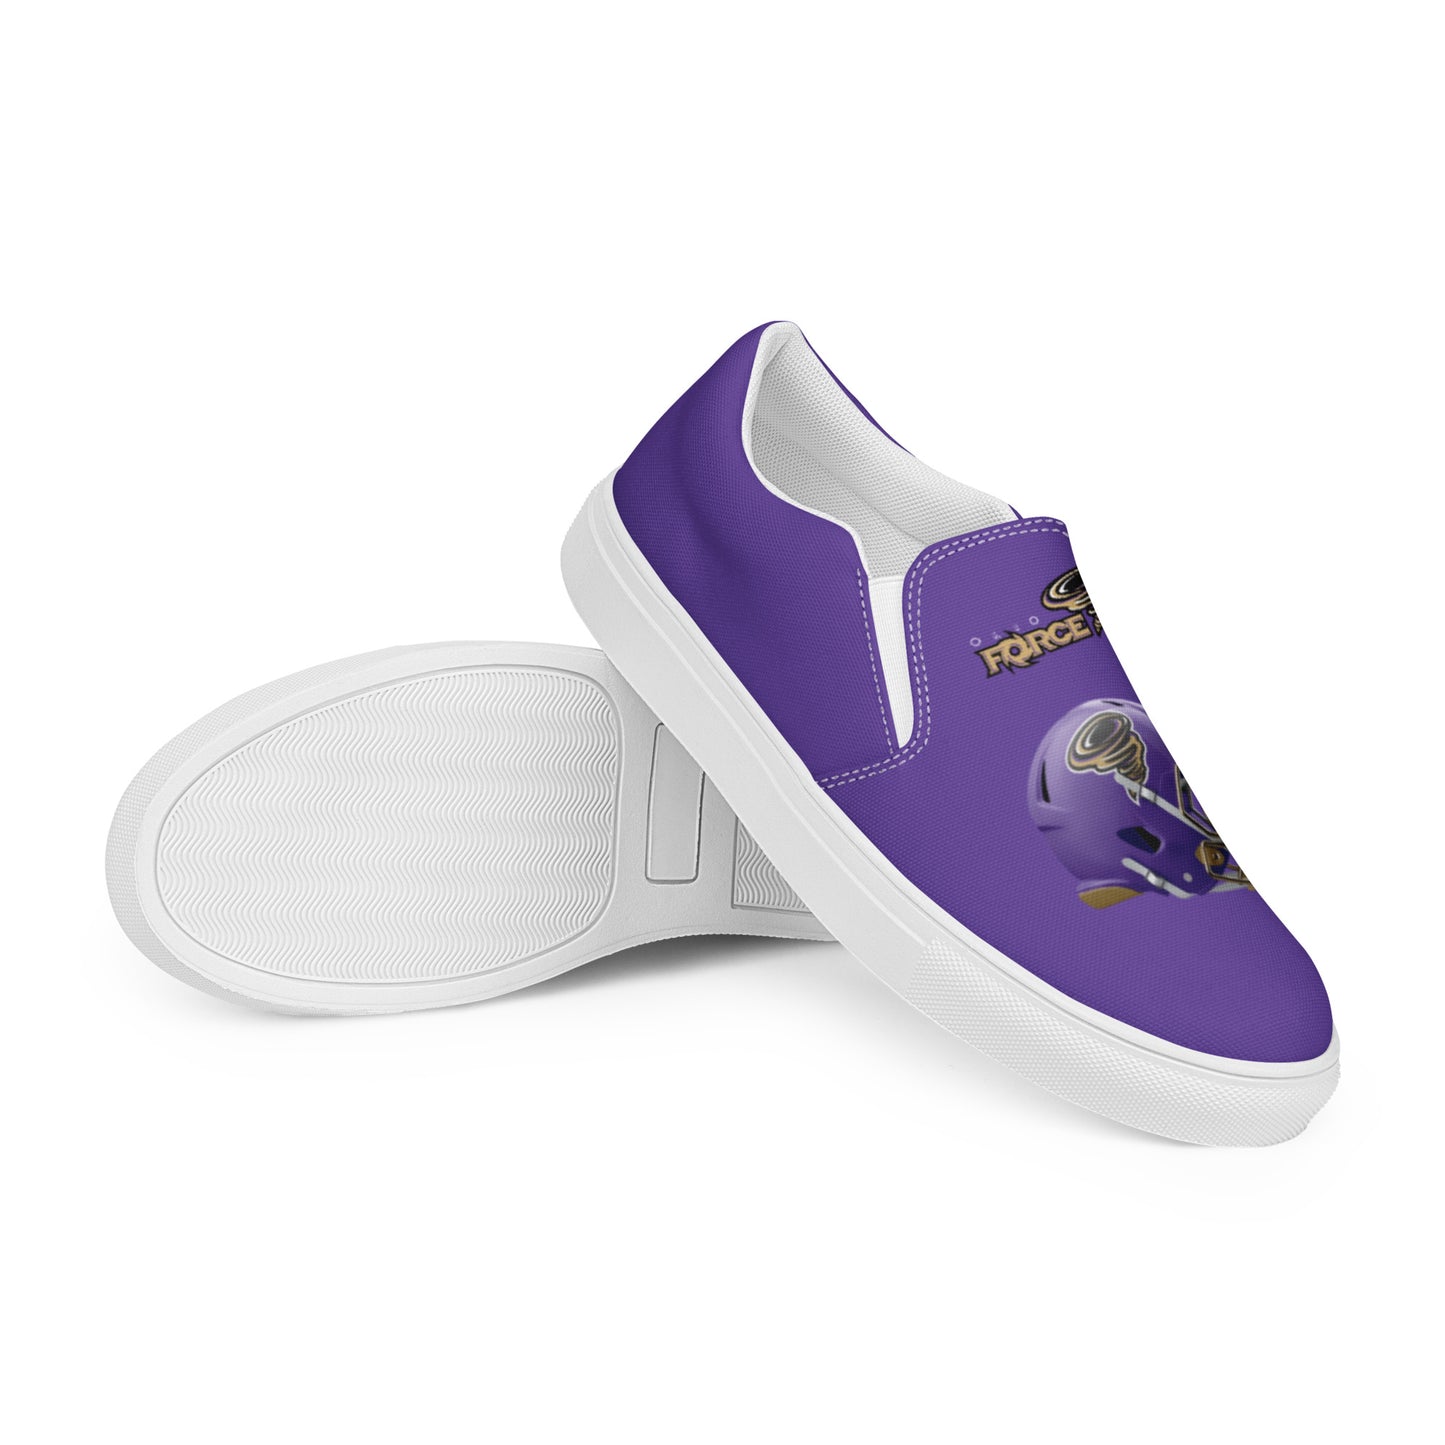 Force Slip-on Canvas Shoes